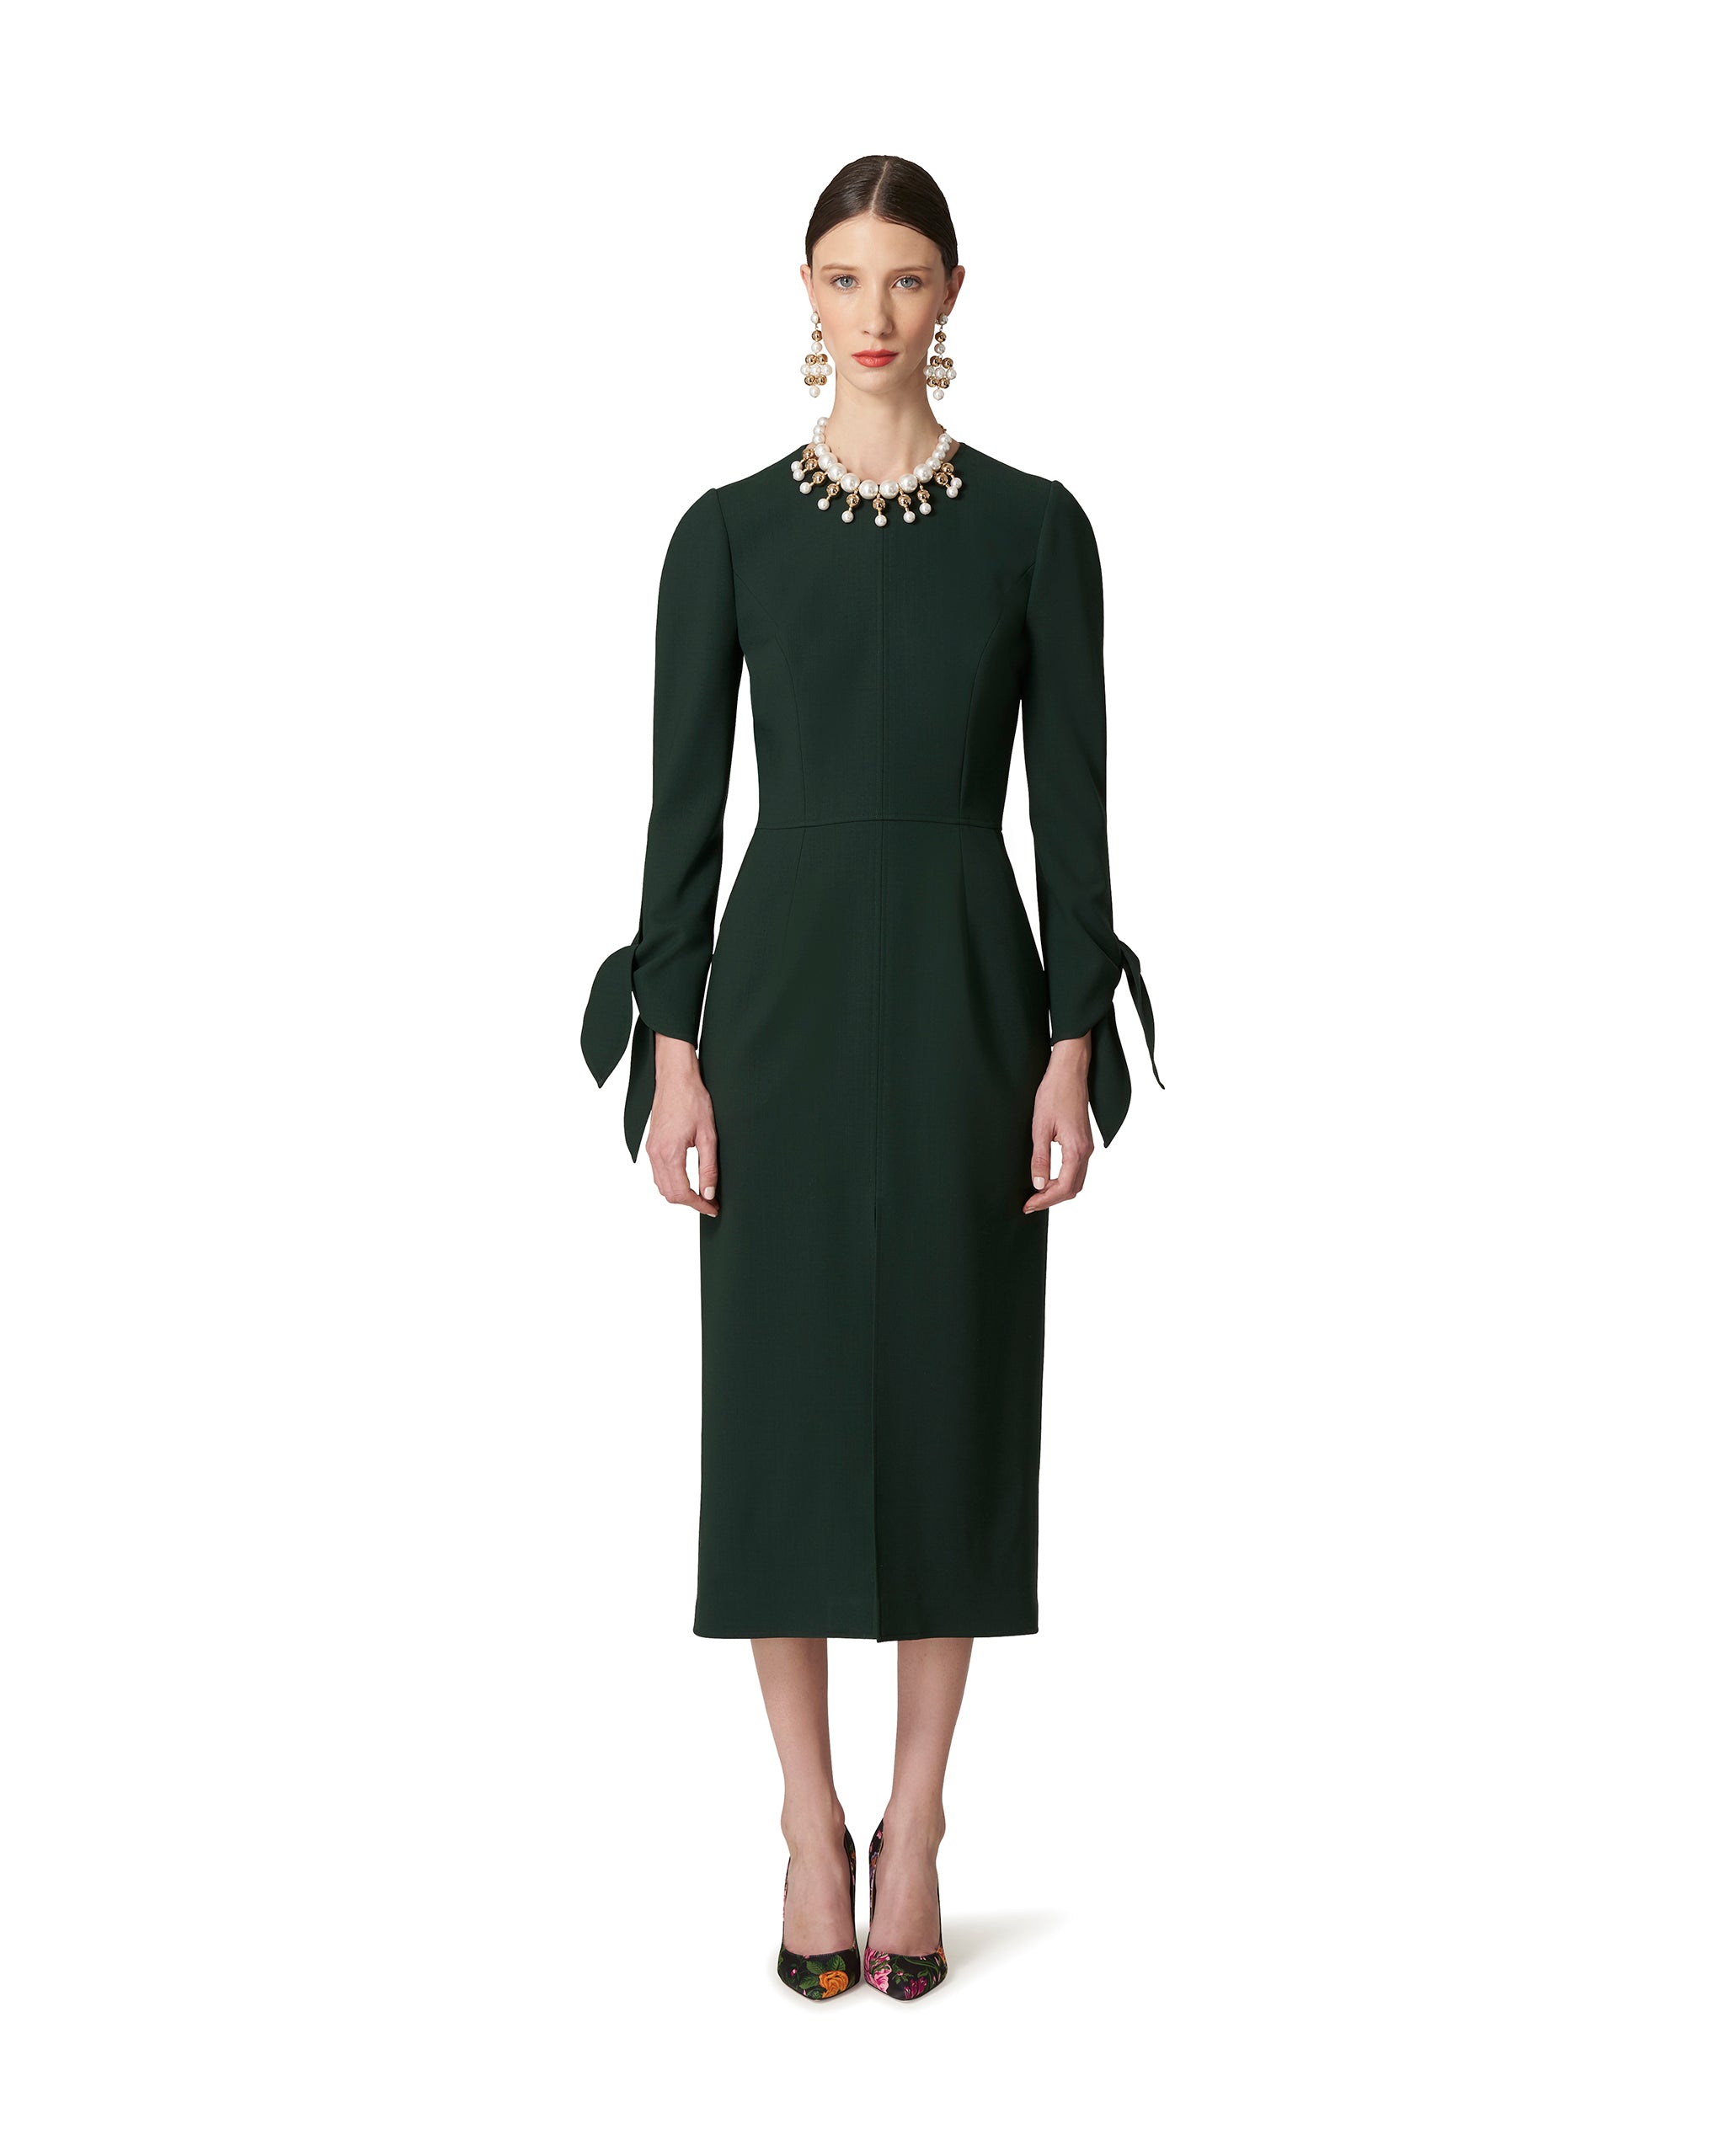 SHEATH DRESS WITH FRONT SLIT AND BOW CUFF